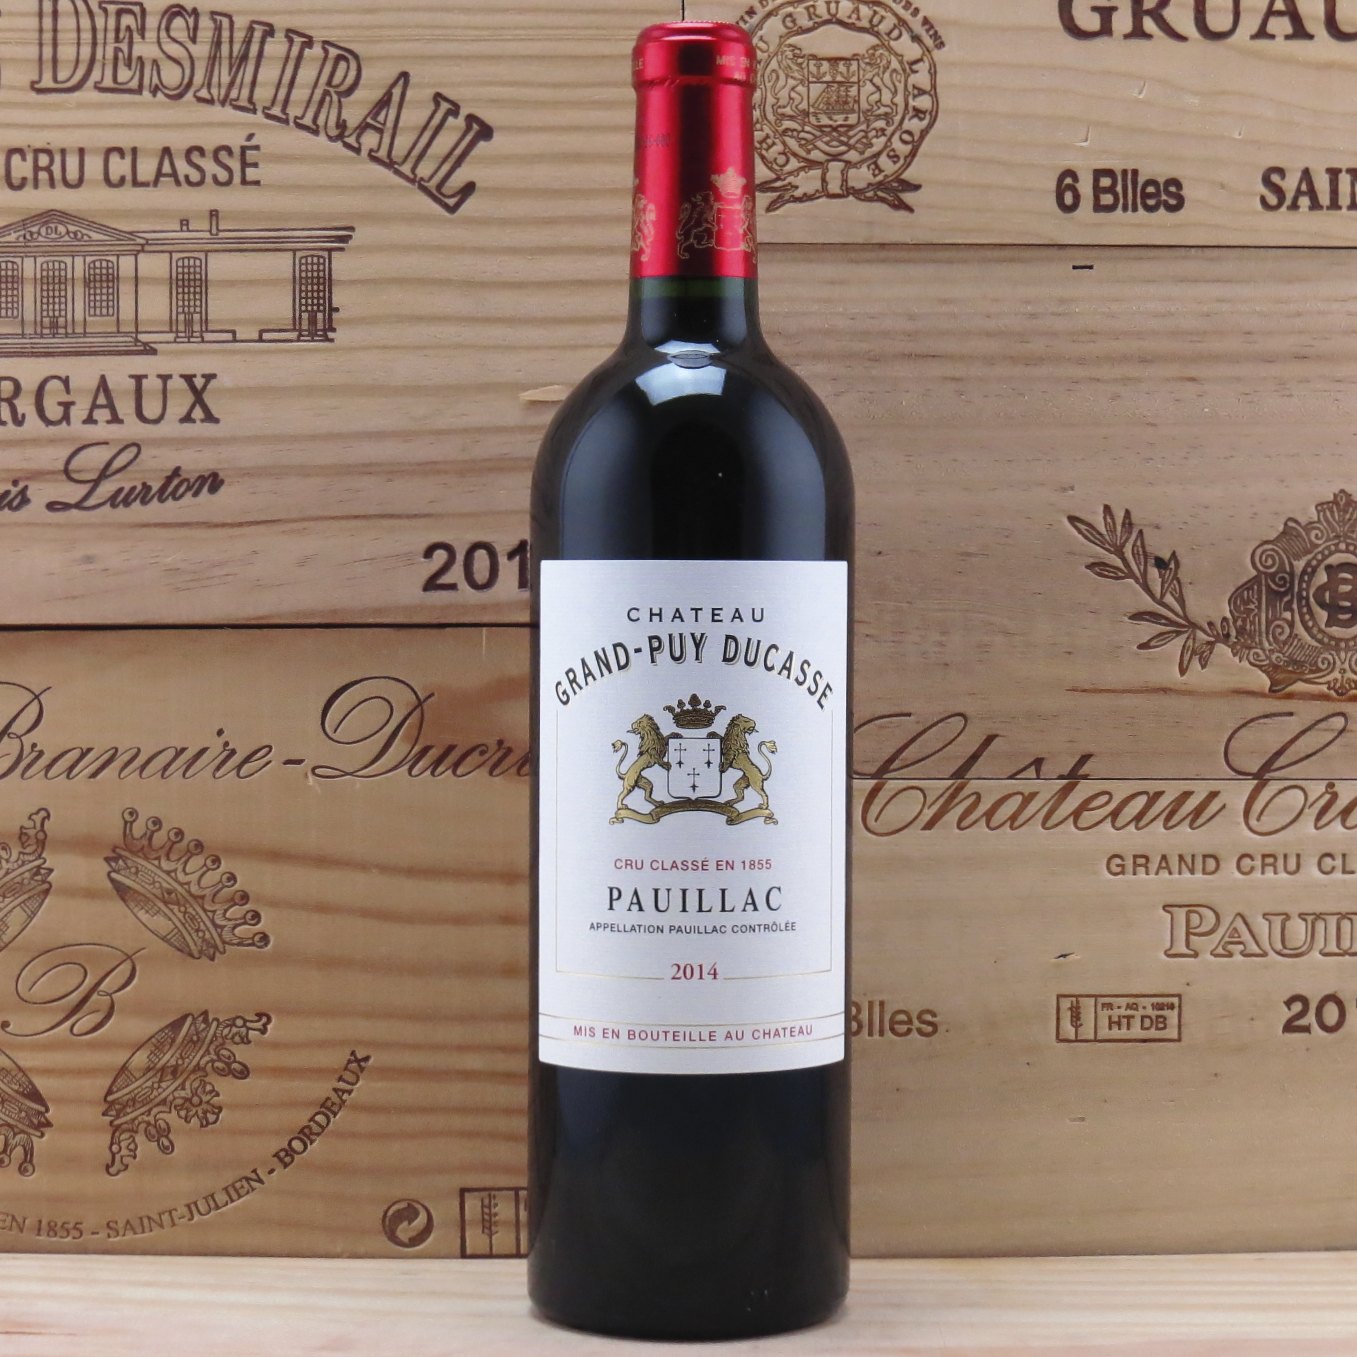 2014 Chateau Grand Puy Ducasse